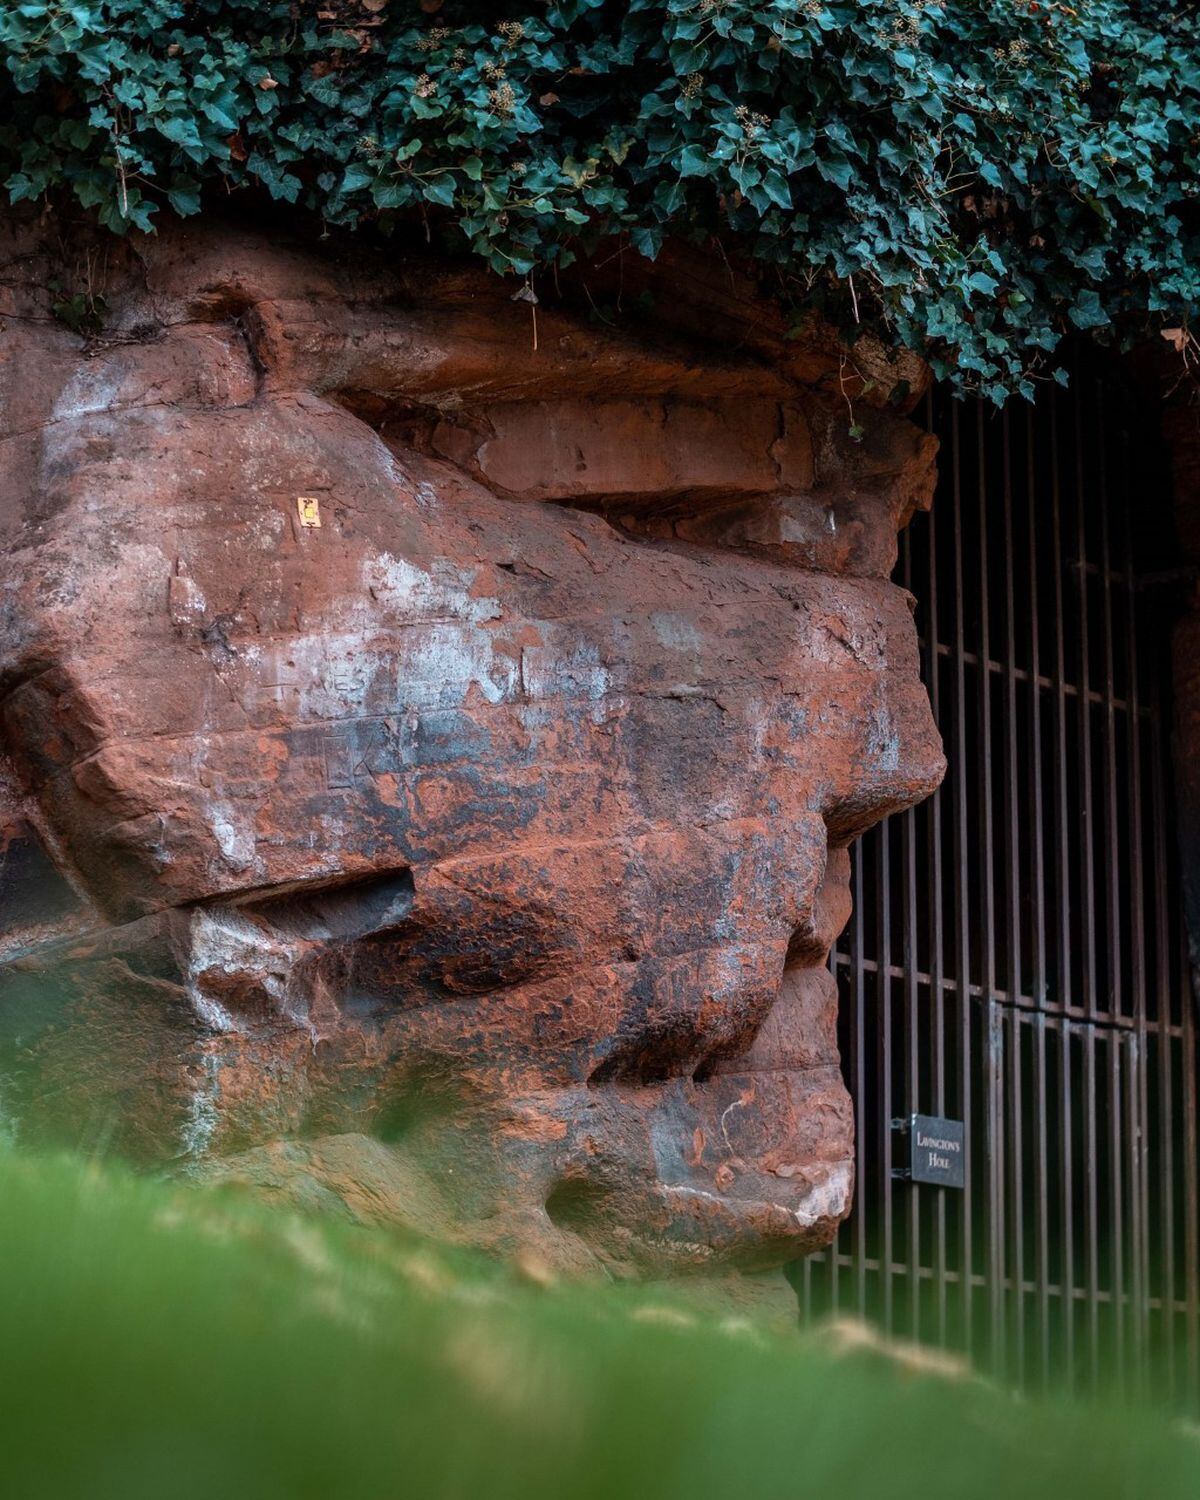 The mysterious face spotted at the entrance to Lavington's Hole. Photo: Joel Rouse